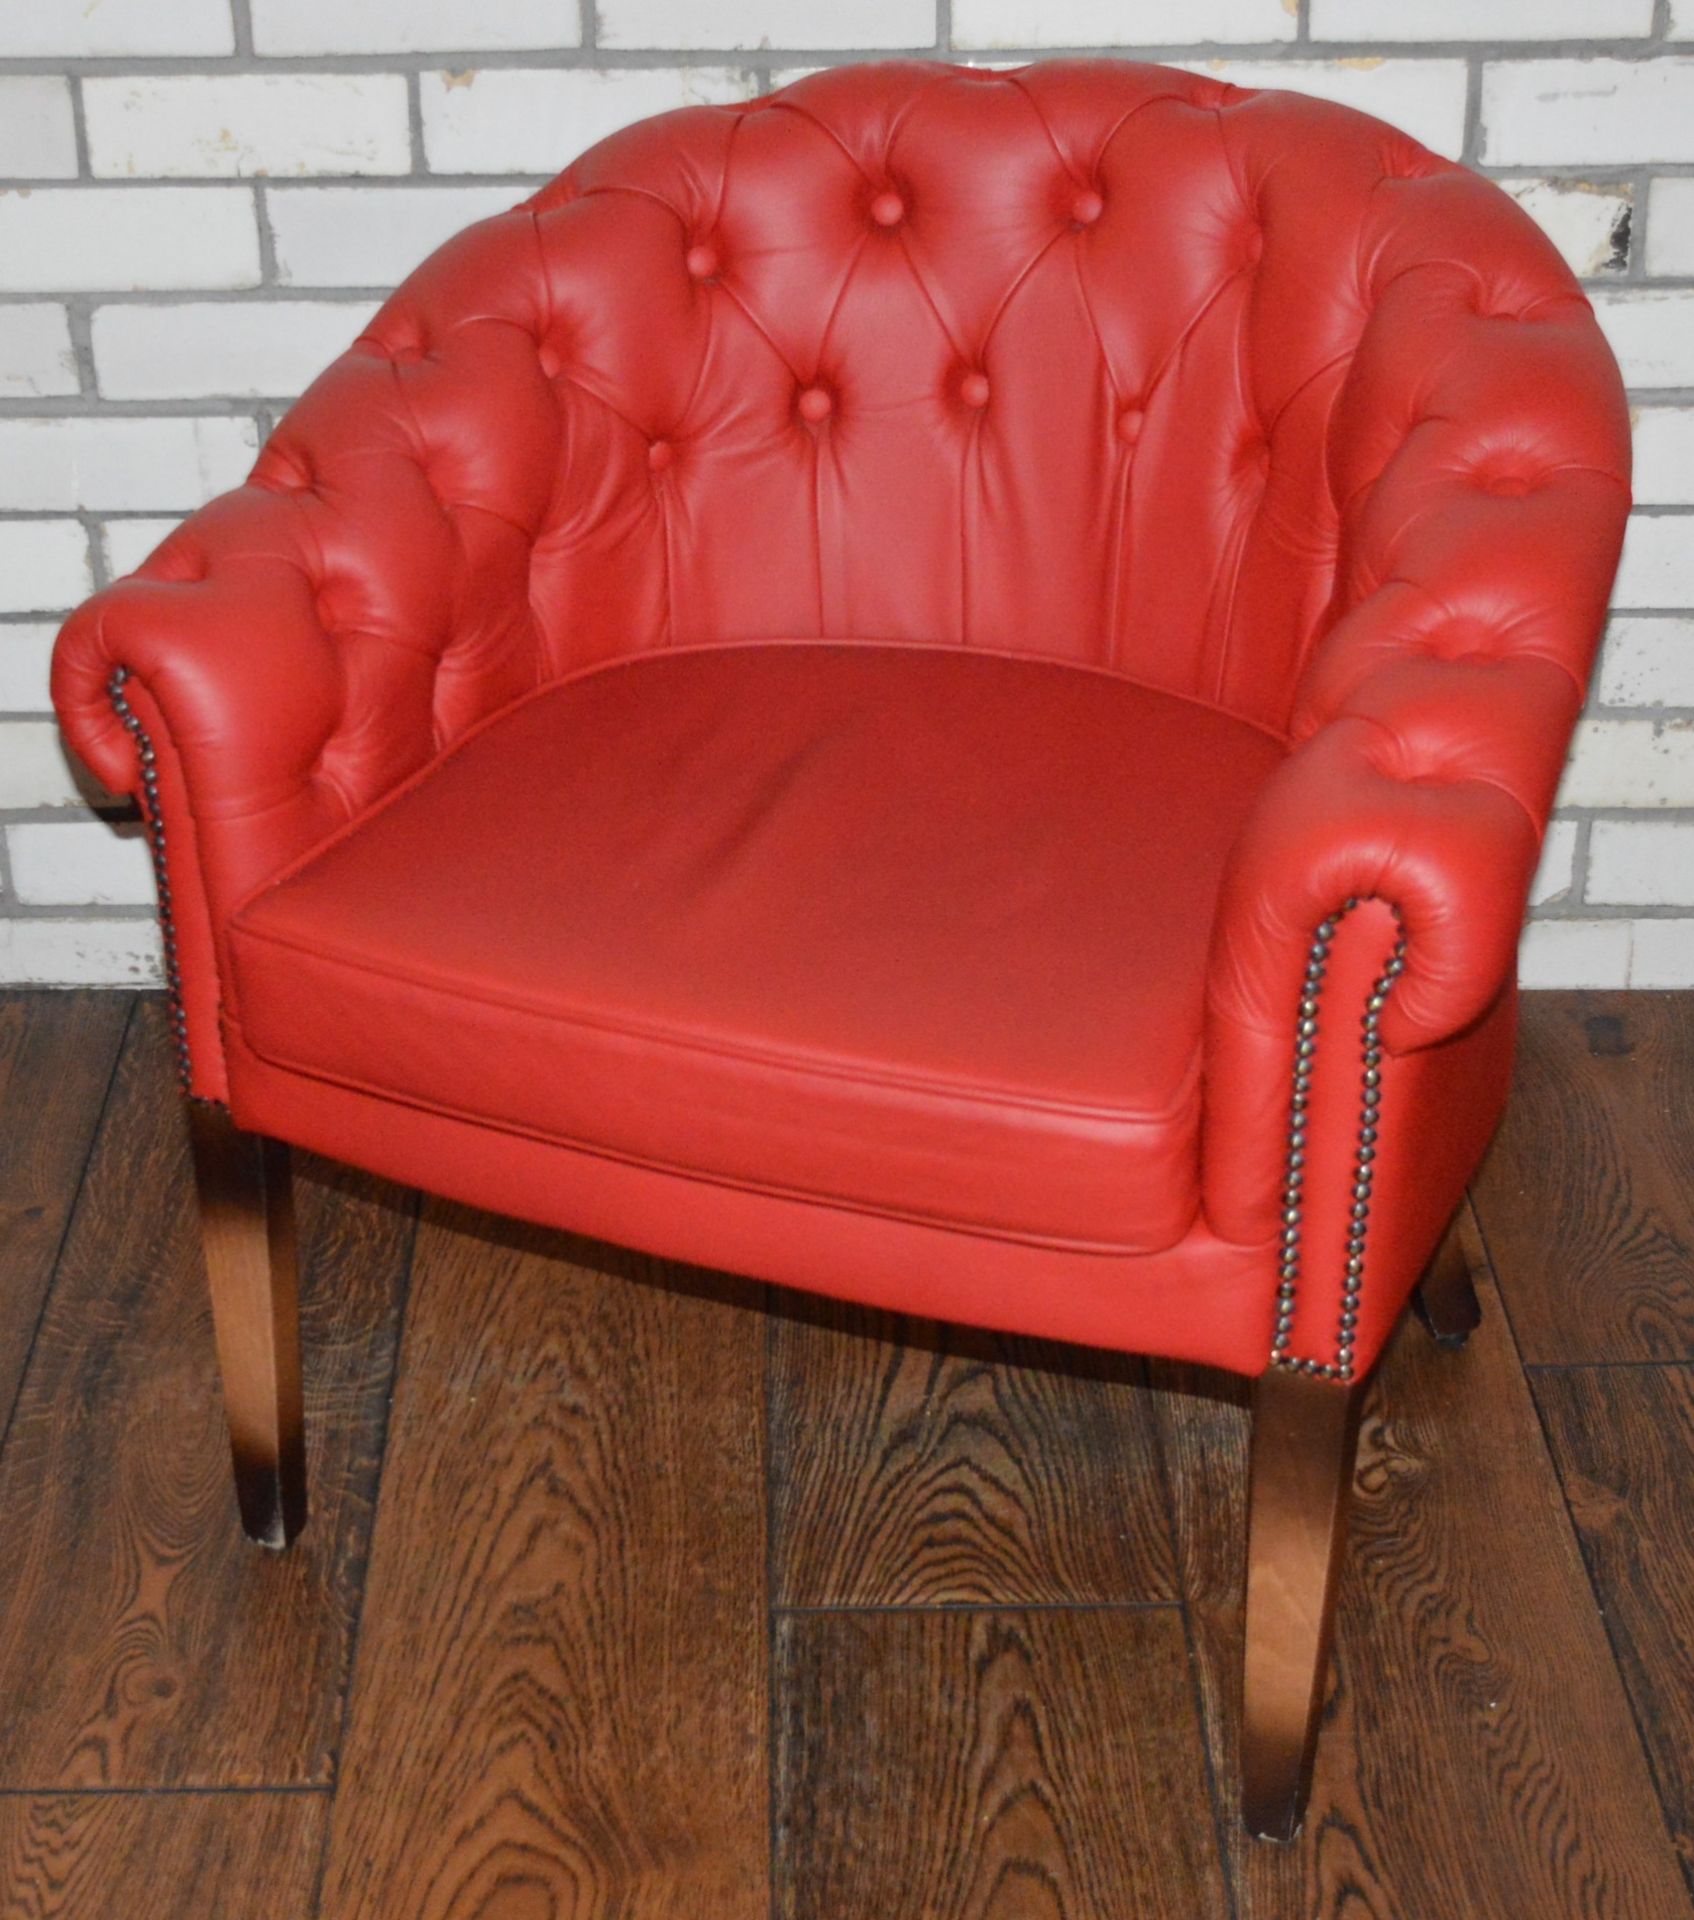 4 x Chesterfield Style Buttoned Back Red Leather Tub Chairs With Hardwood Legs Finished in an - Image 2 of 8